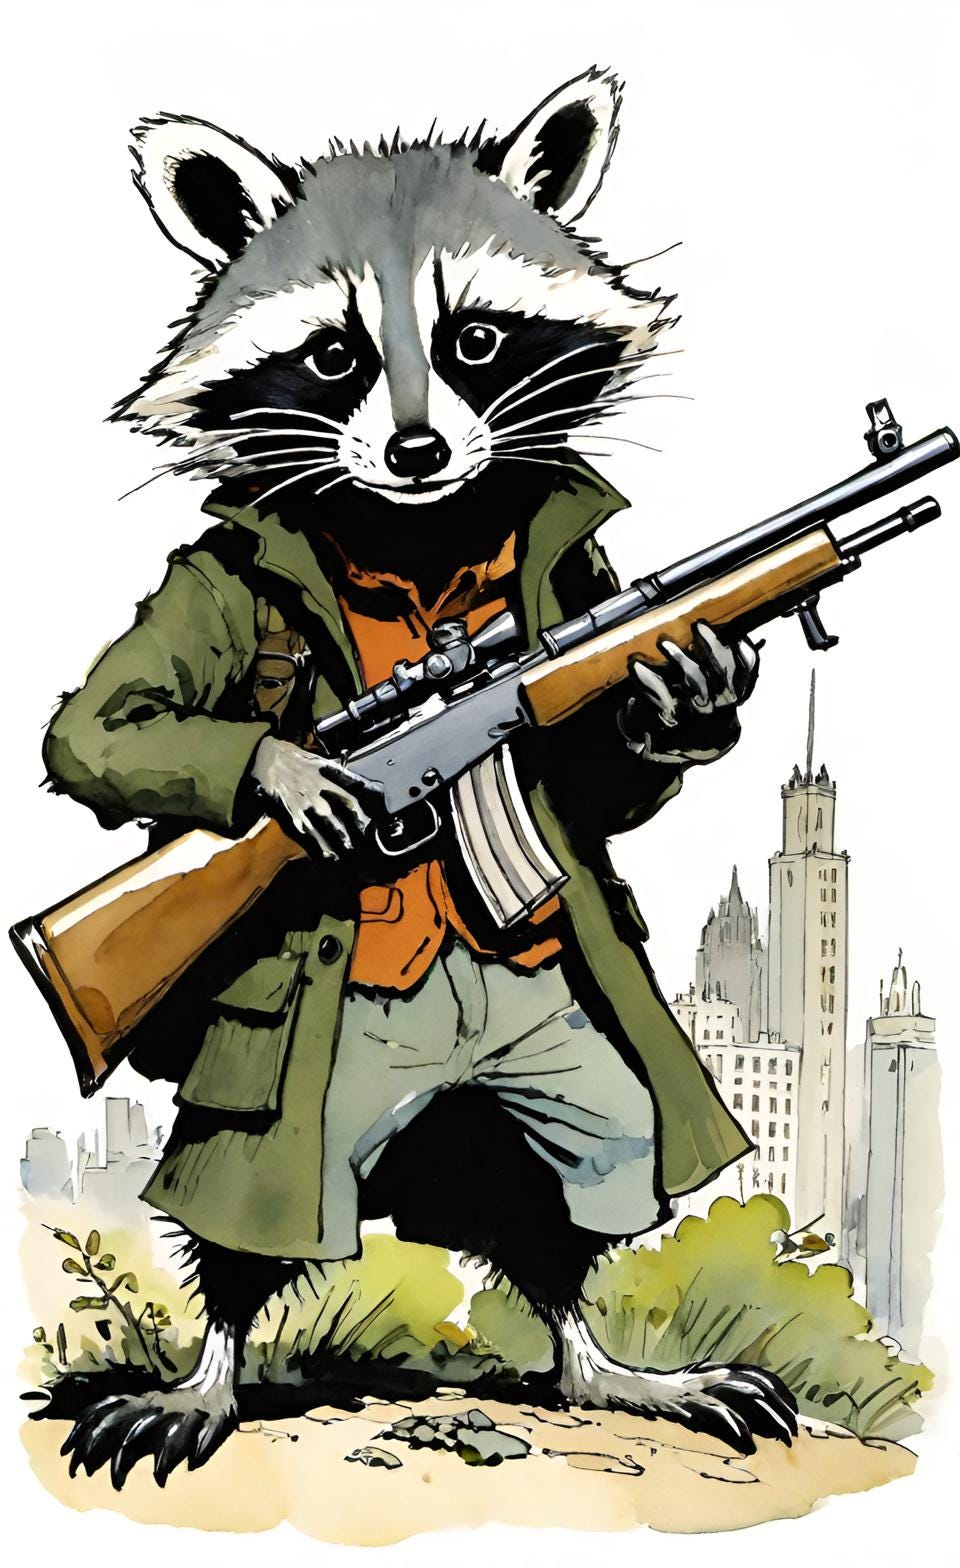 Racoon holding a rifle